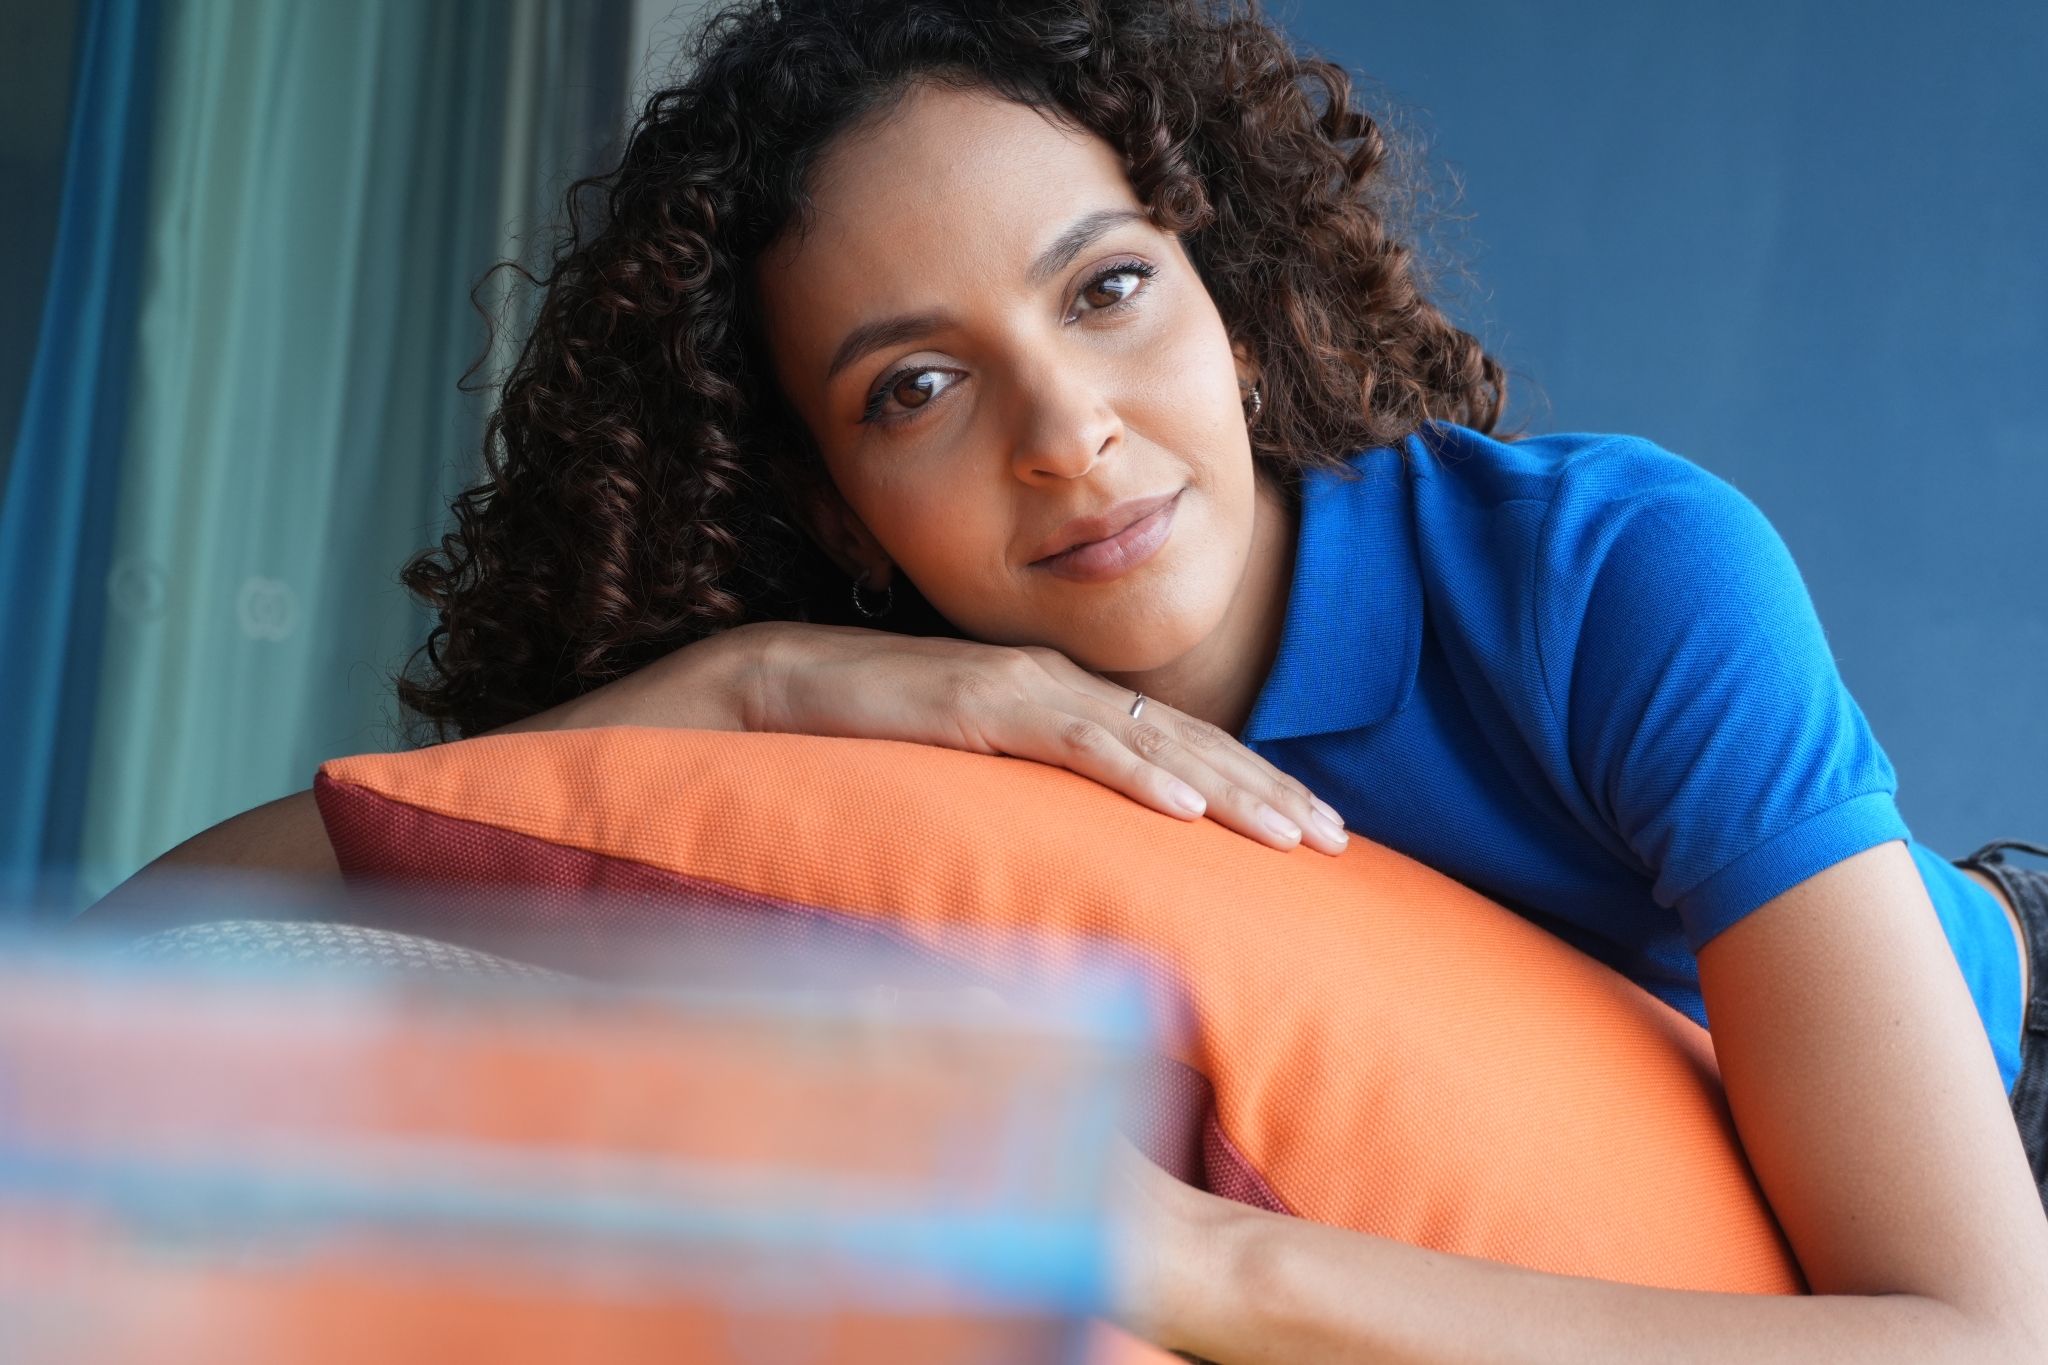 Sample image of a woman leaning against a sofa, with the glass in the foreground blurred